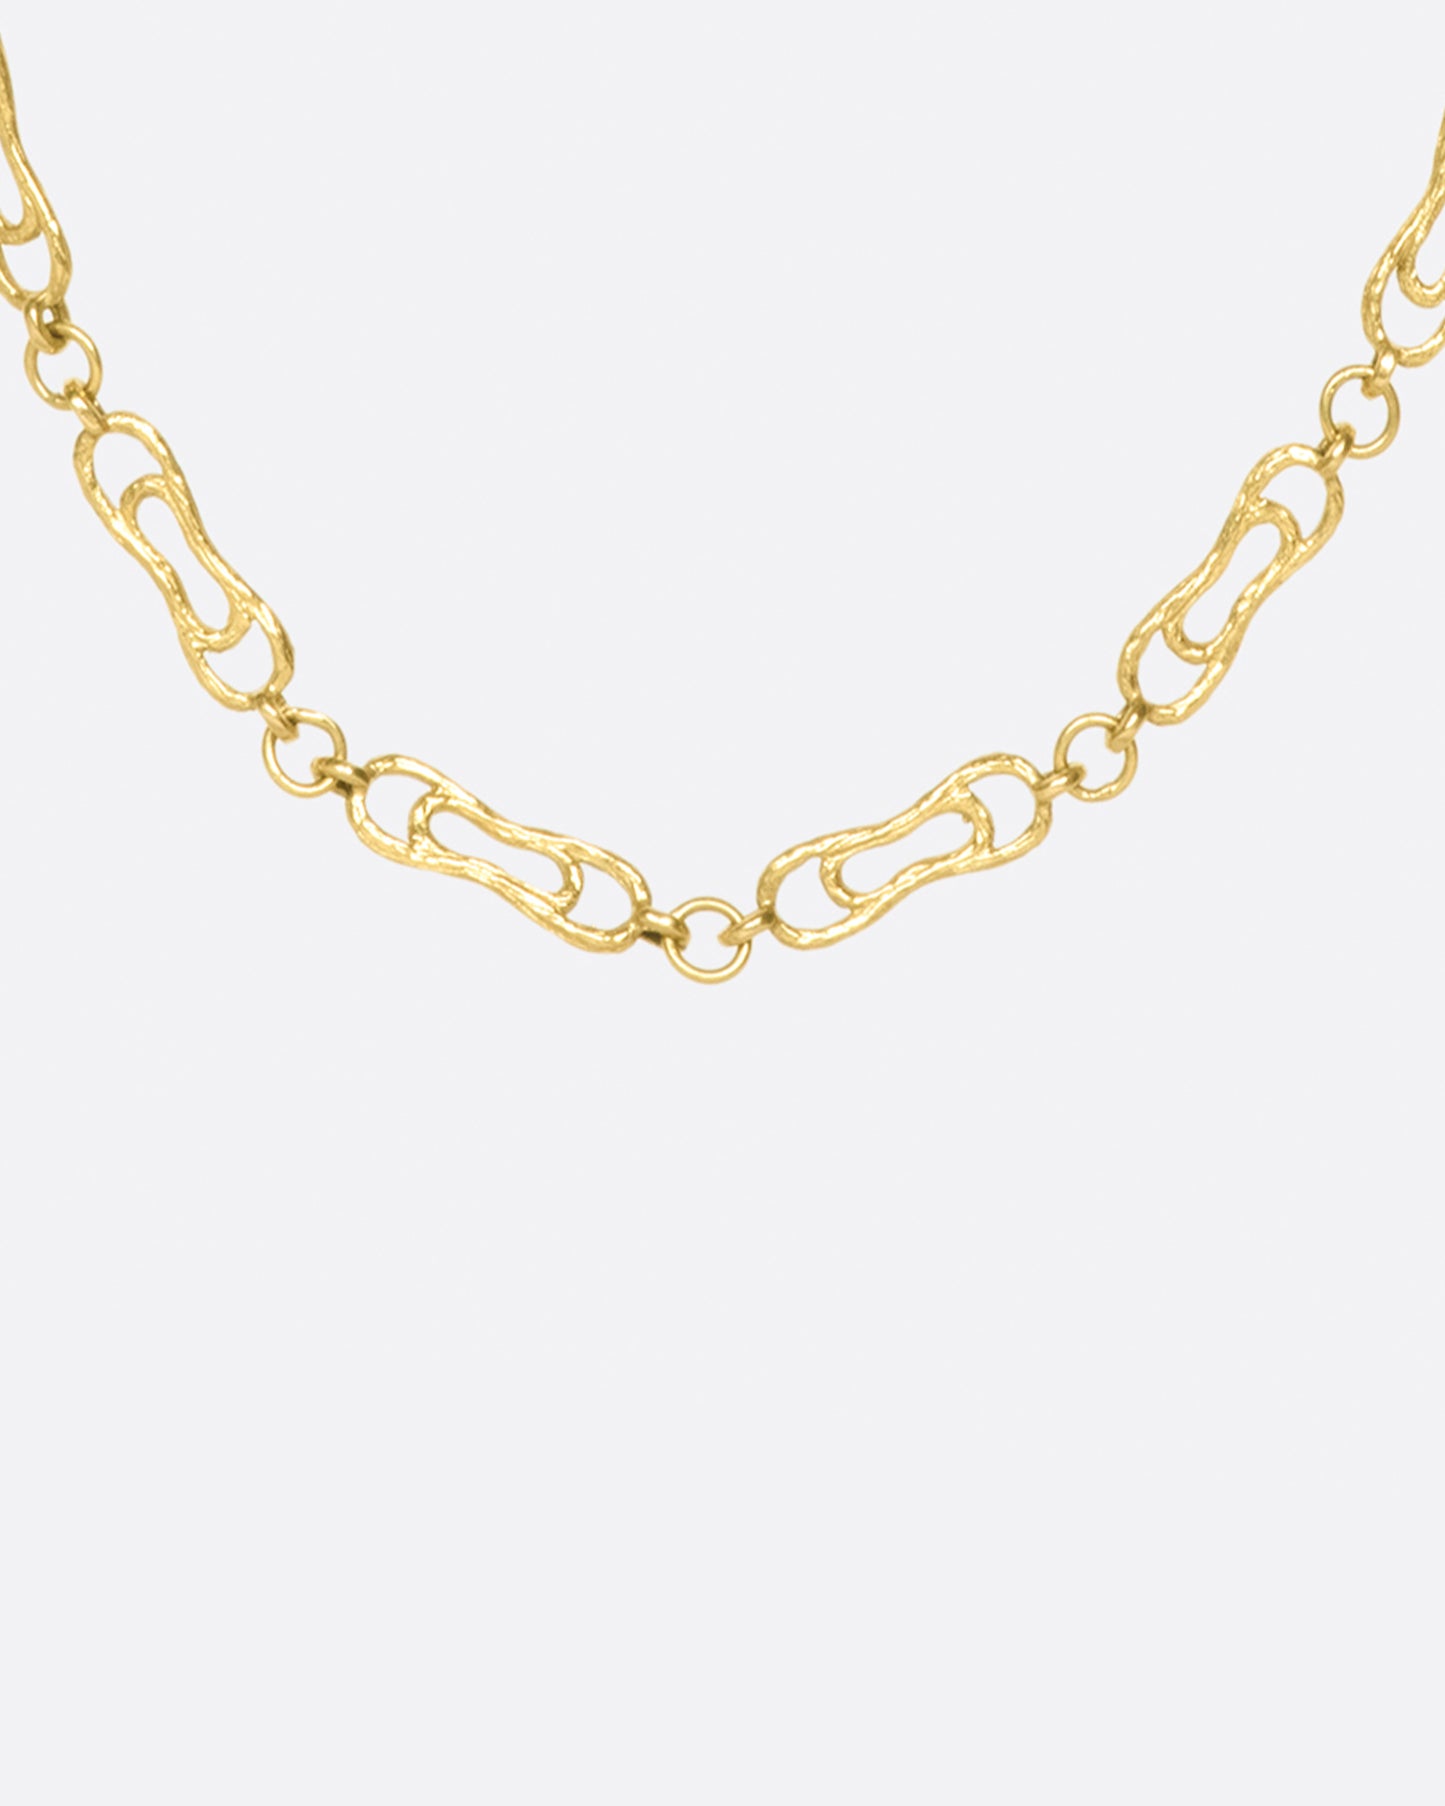 This handmade chain is just as glorious on its own as it is with a pendant or two.